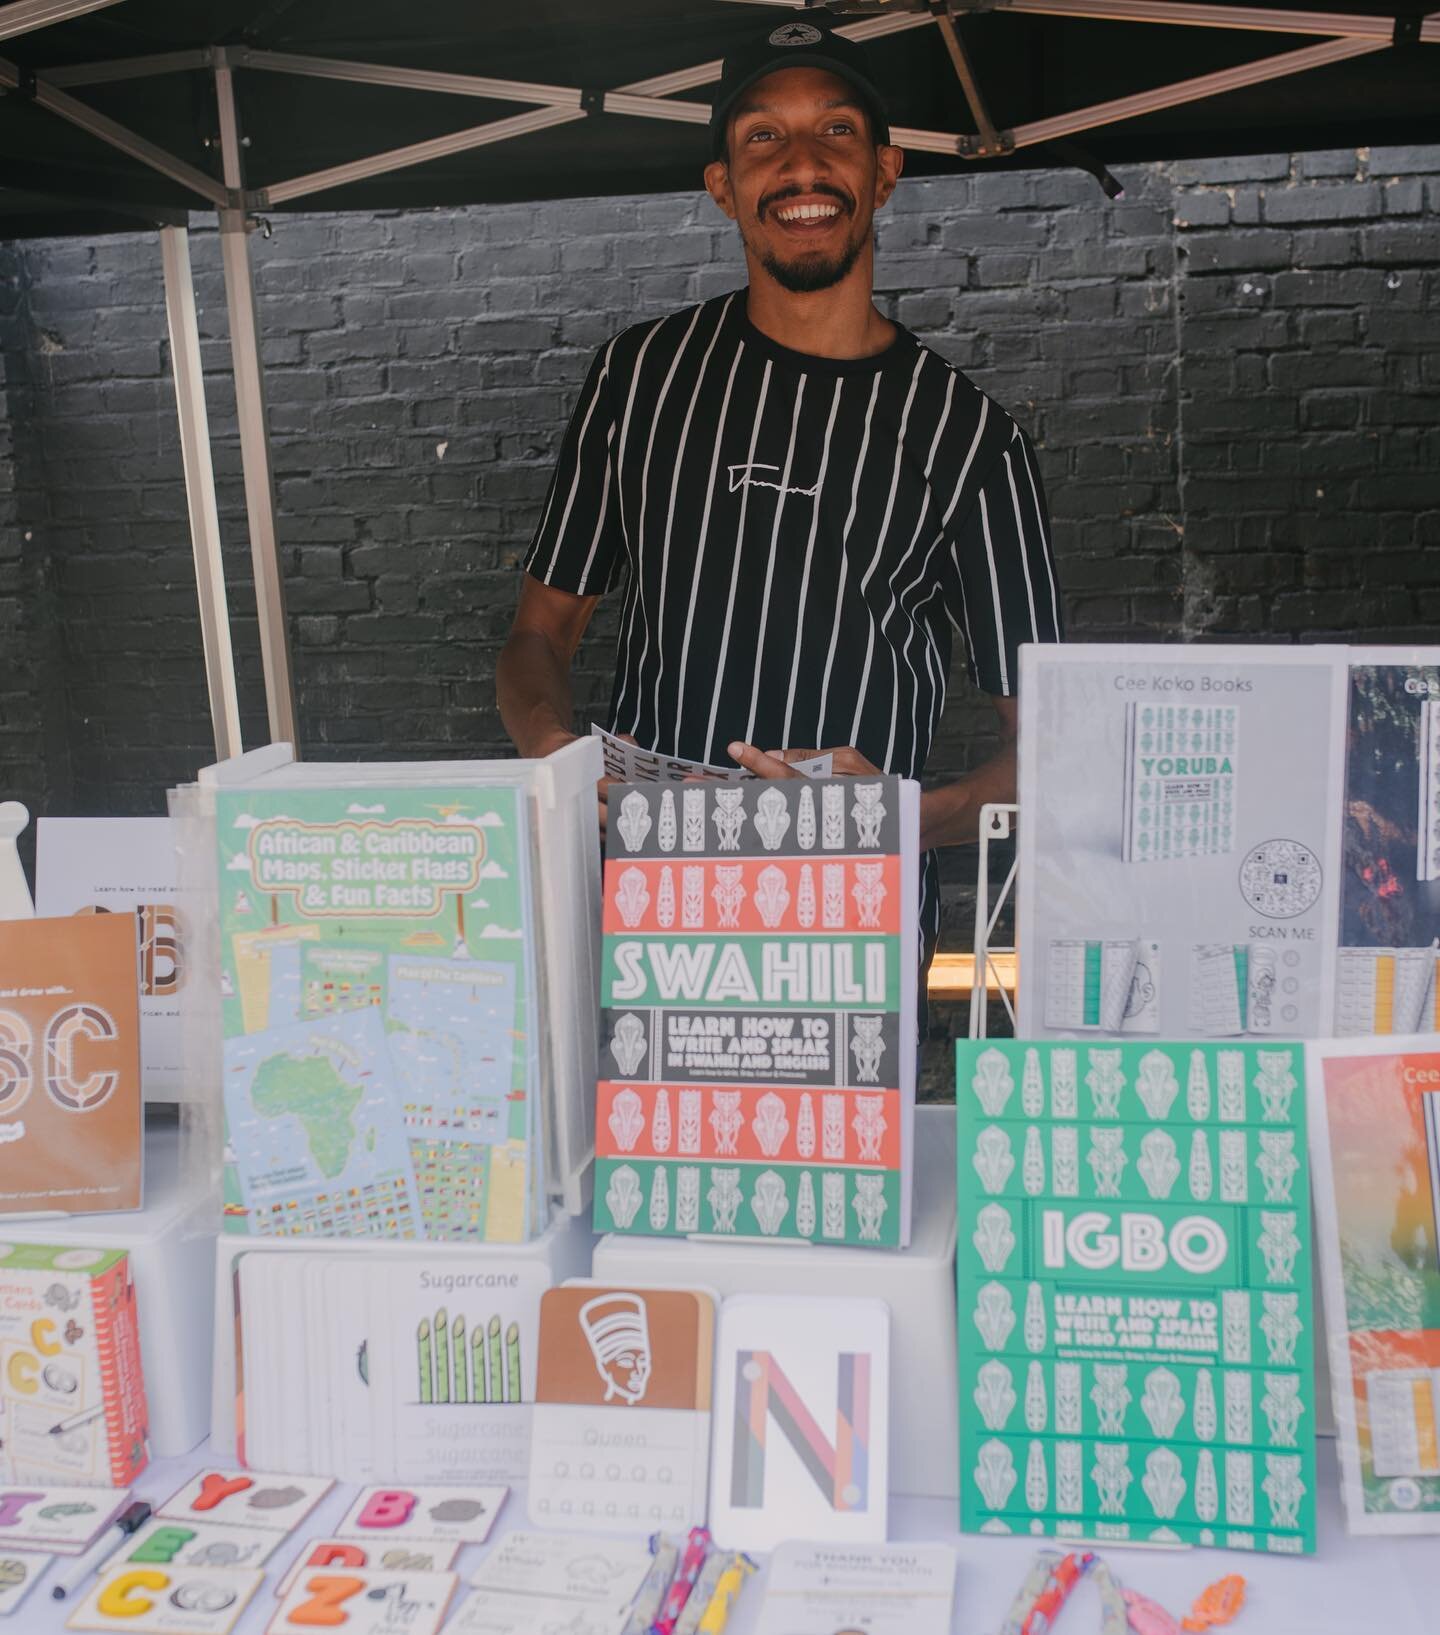 Back again this weekend📣 
Come tru&rsquo; Come tru&hellip;Stall and Products ready for Ya🔥☀️

@blackeatsldn @cee_koko_books 

🗓 30TH &amp; 31ST JULY
⏰ 12 PM - 6 PM
📍 Bohemia Place, Hackney Central, E8 1DU
🔊 @_likeflo @nassenuk @rare.treat @djoak